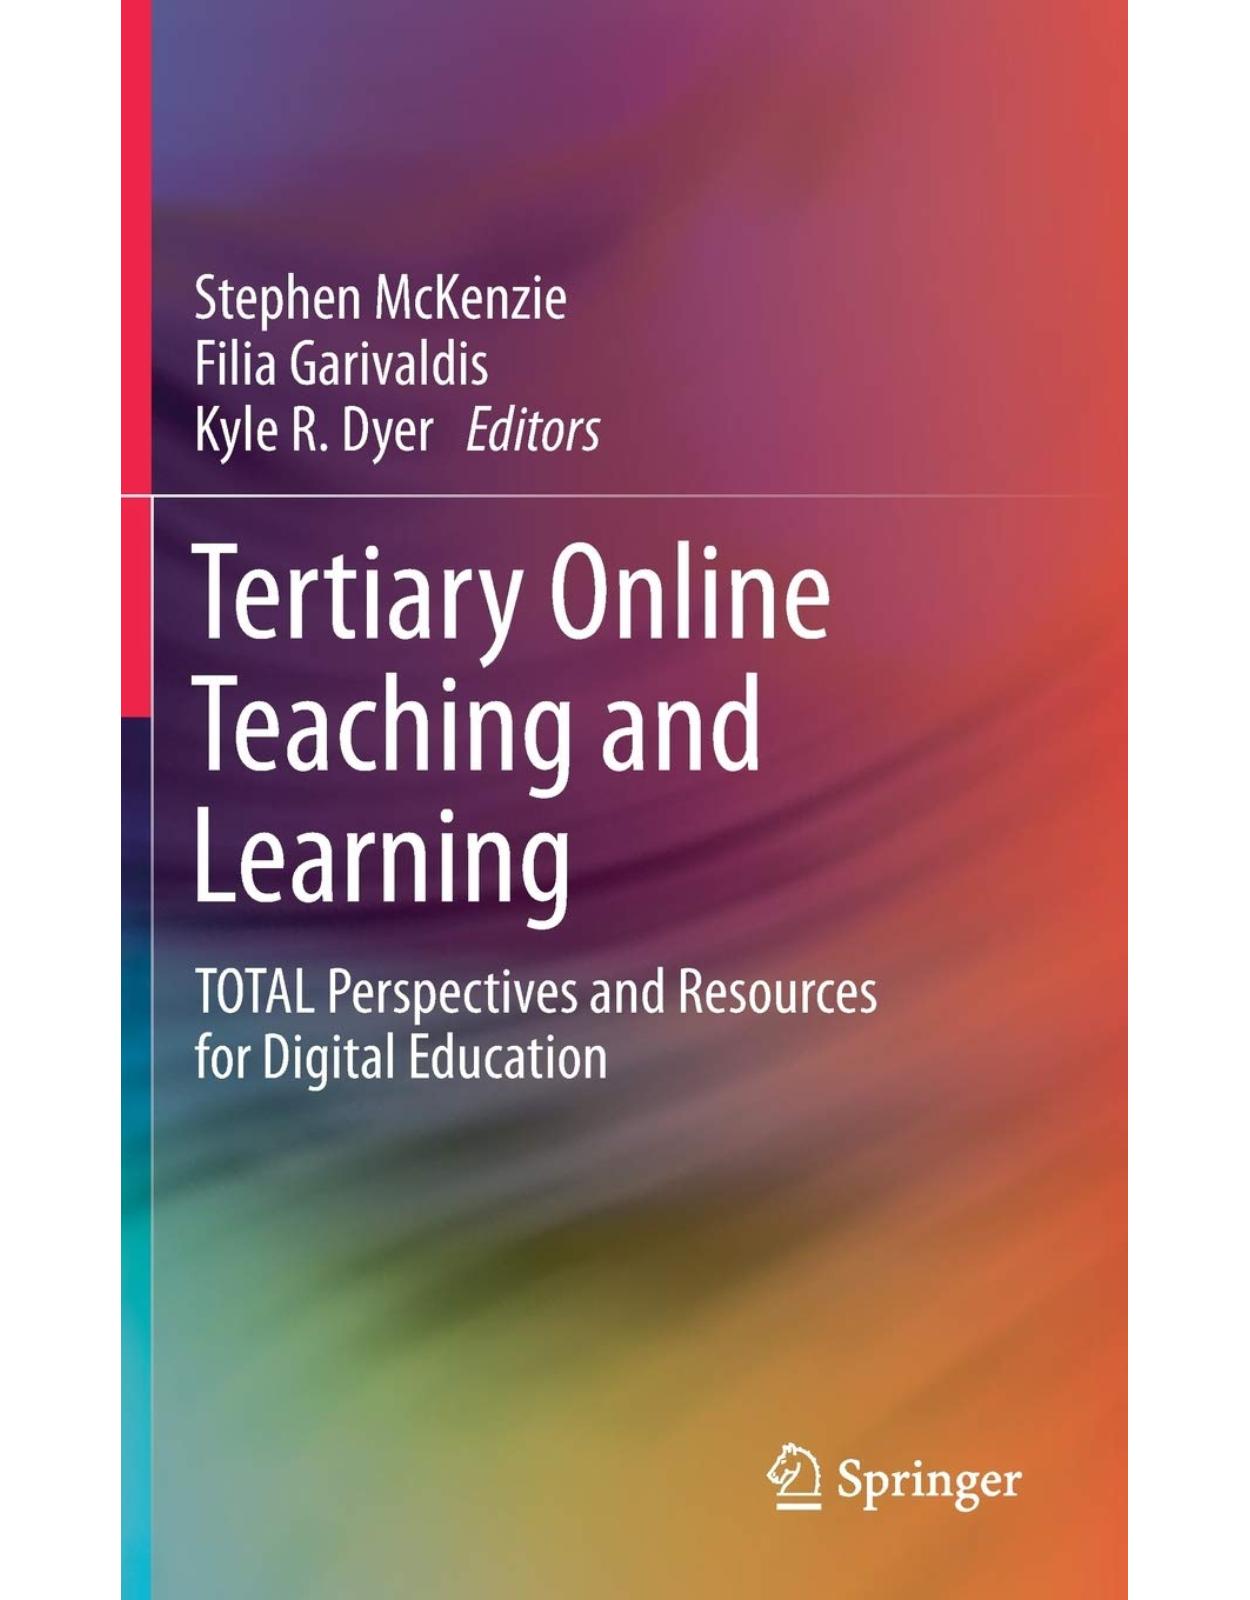 Tertiary Online Teaching and Learning: TOTAL Perspectives and Resources for Digital Education